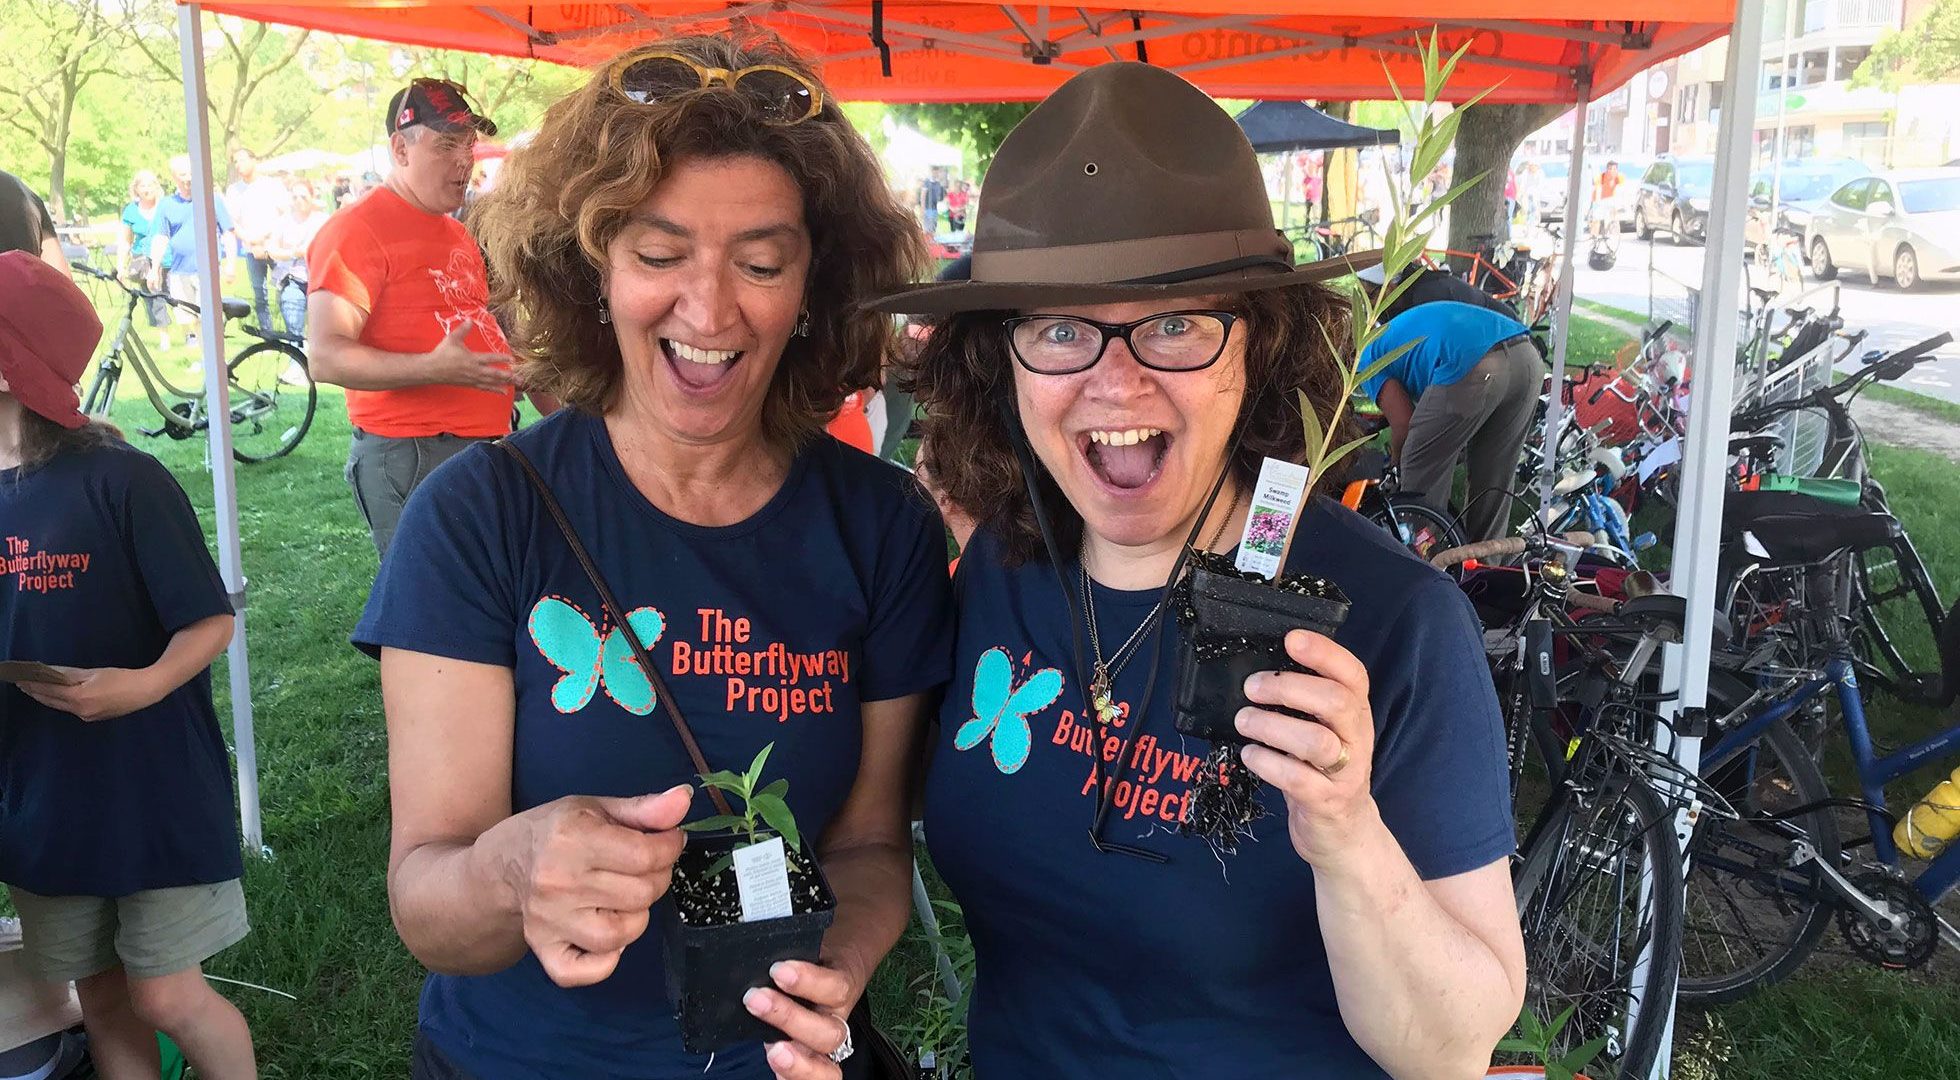 Butterflyway Rangers at the #gotmilkweed giveaway event